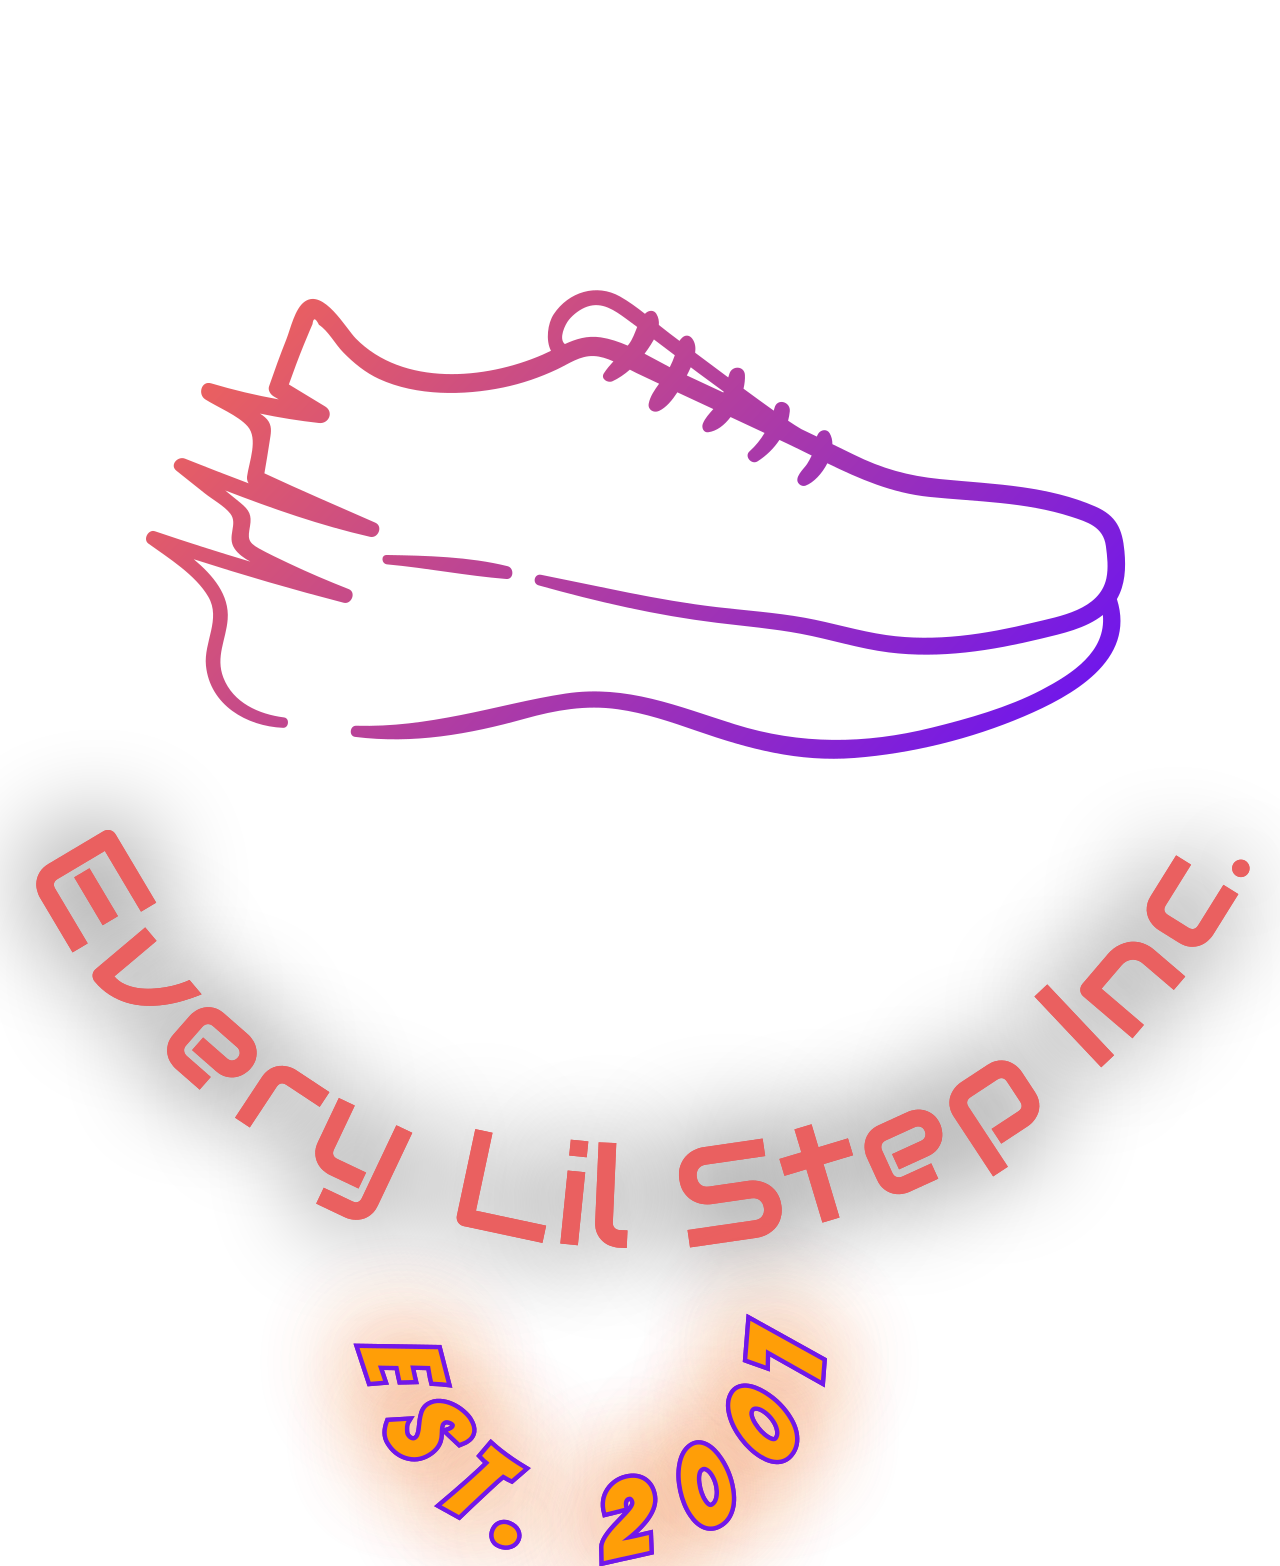 Every Lil Step Inc.'s web page